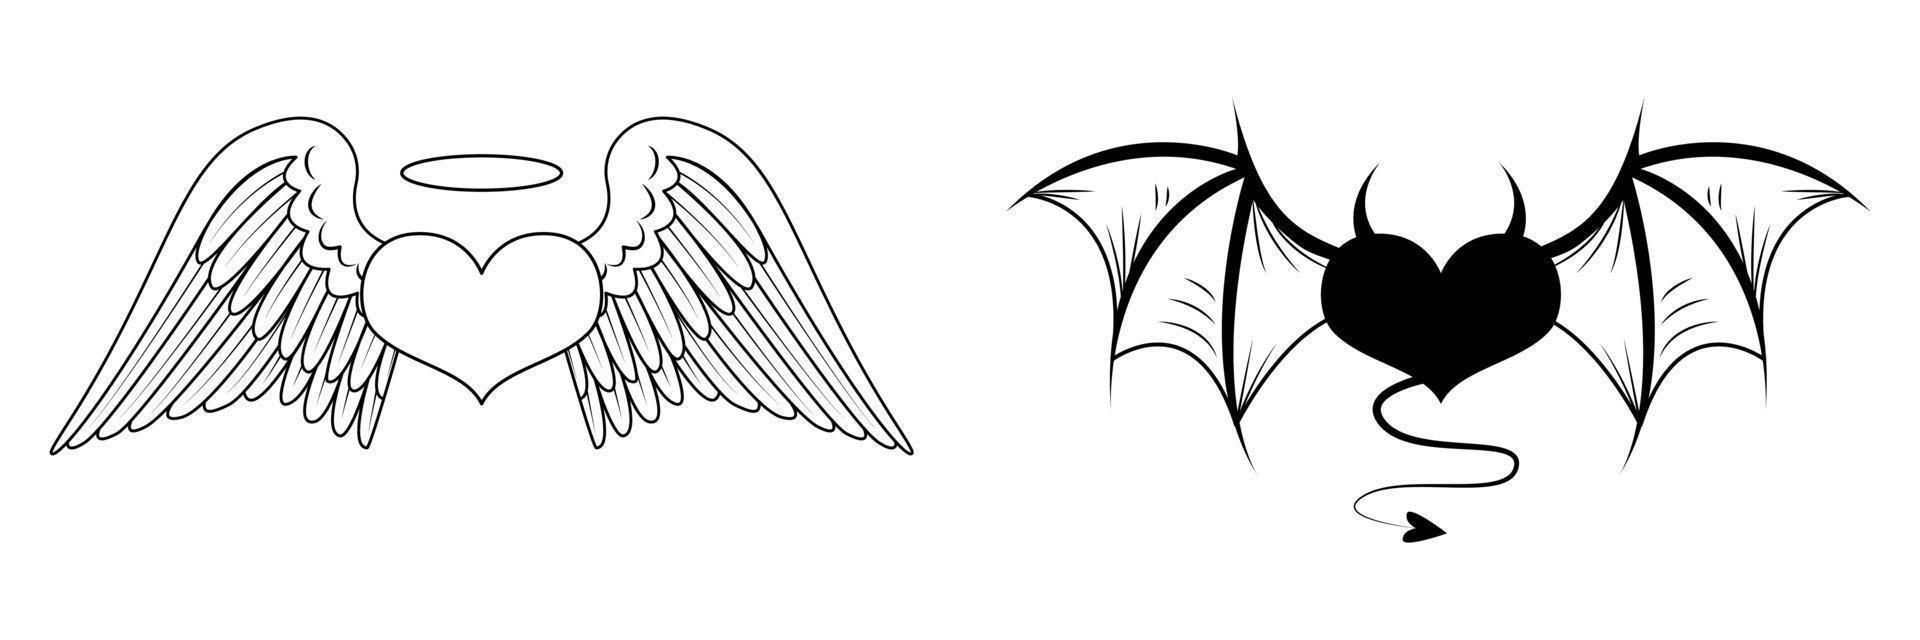 Two hearts with angelic and demonic wings. Angel heart with halo. Devil heart with horns and tail. Sketch for a tattoo. Vector illustration isolated on white background